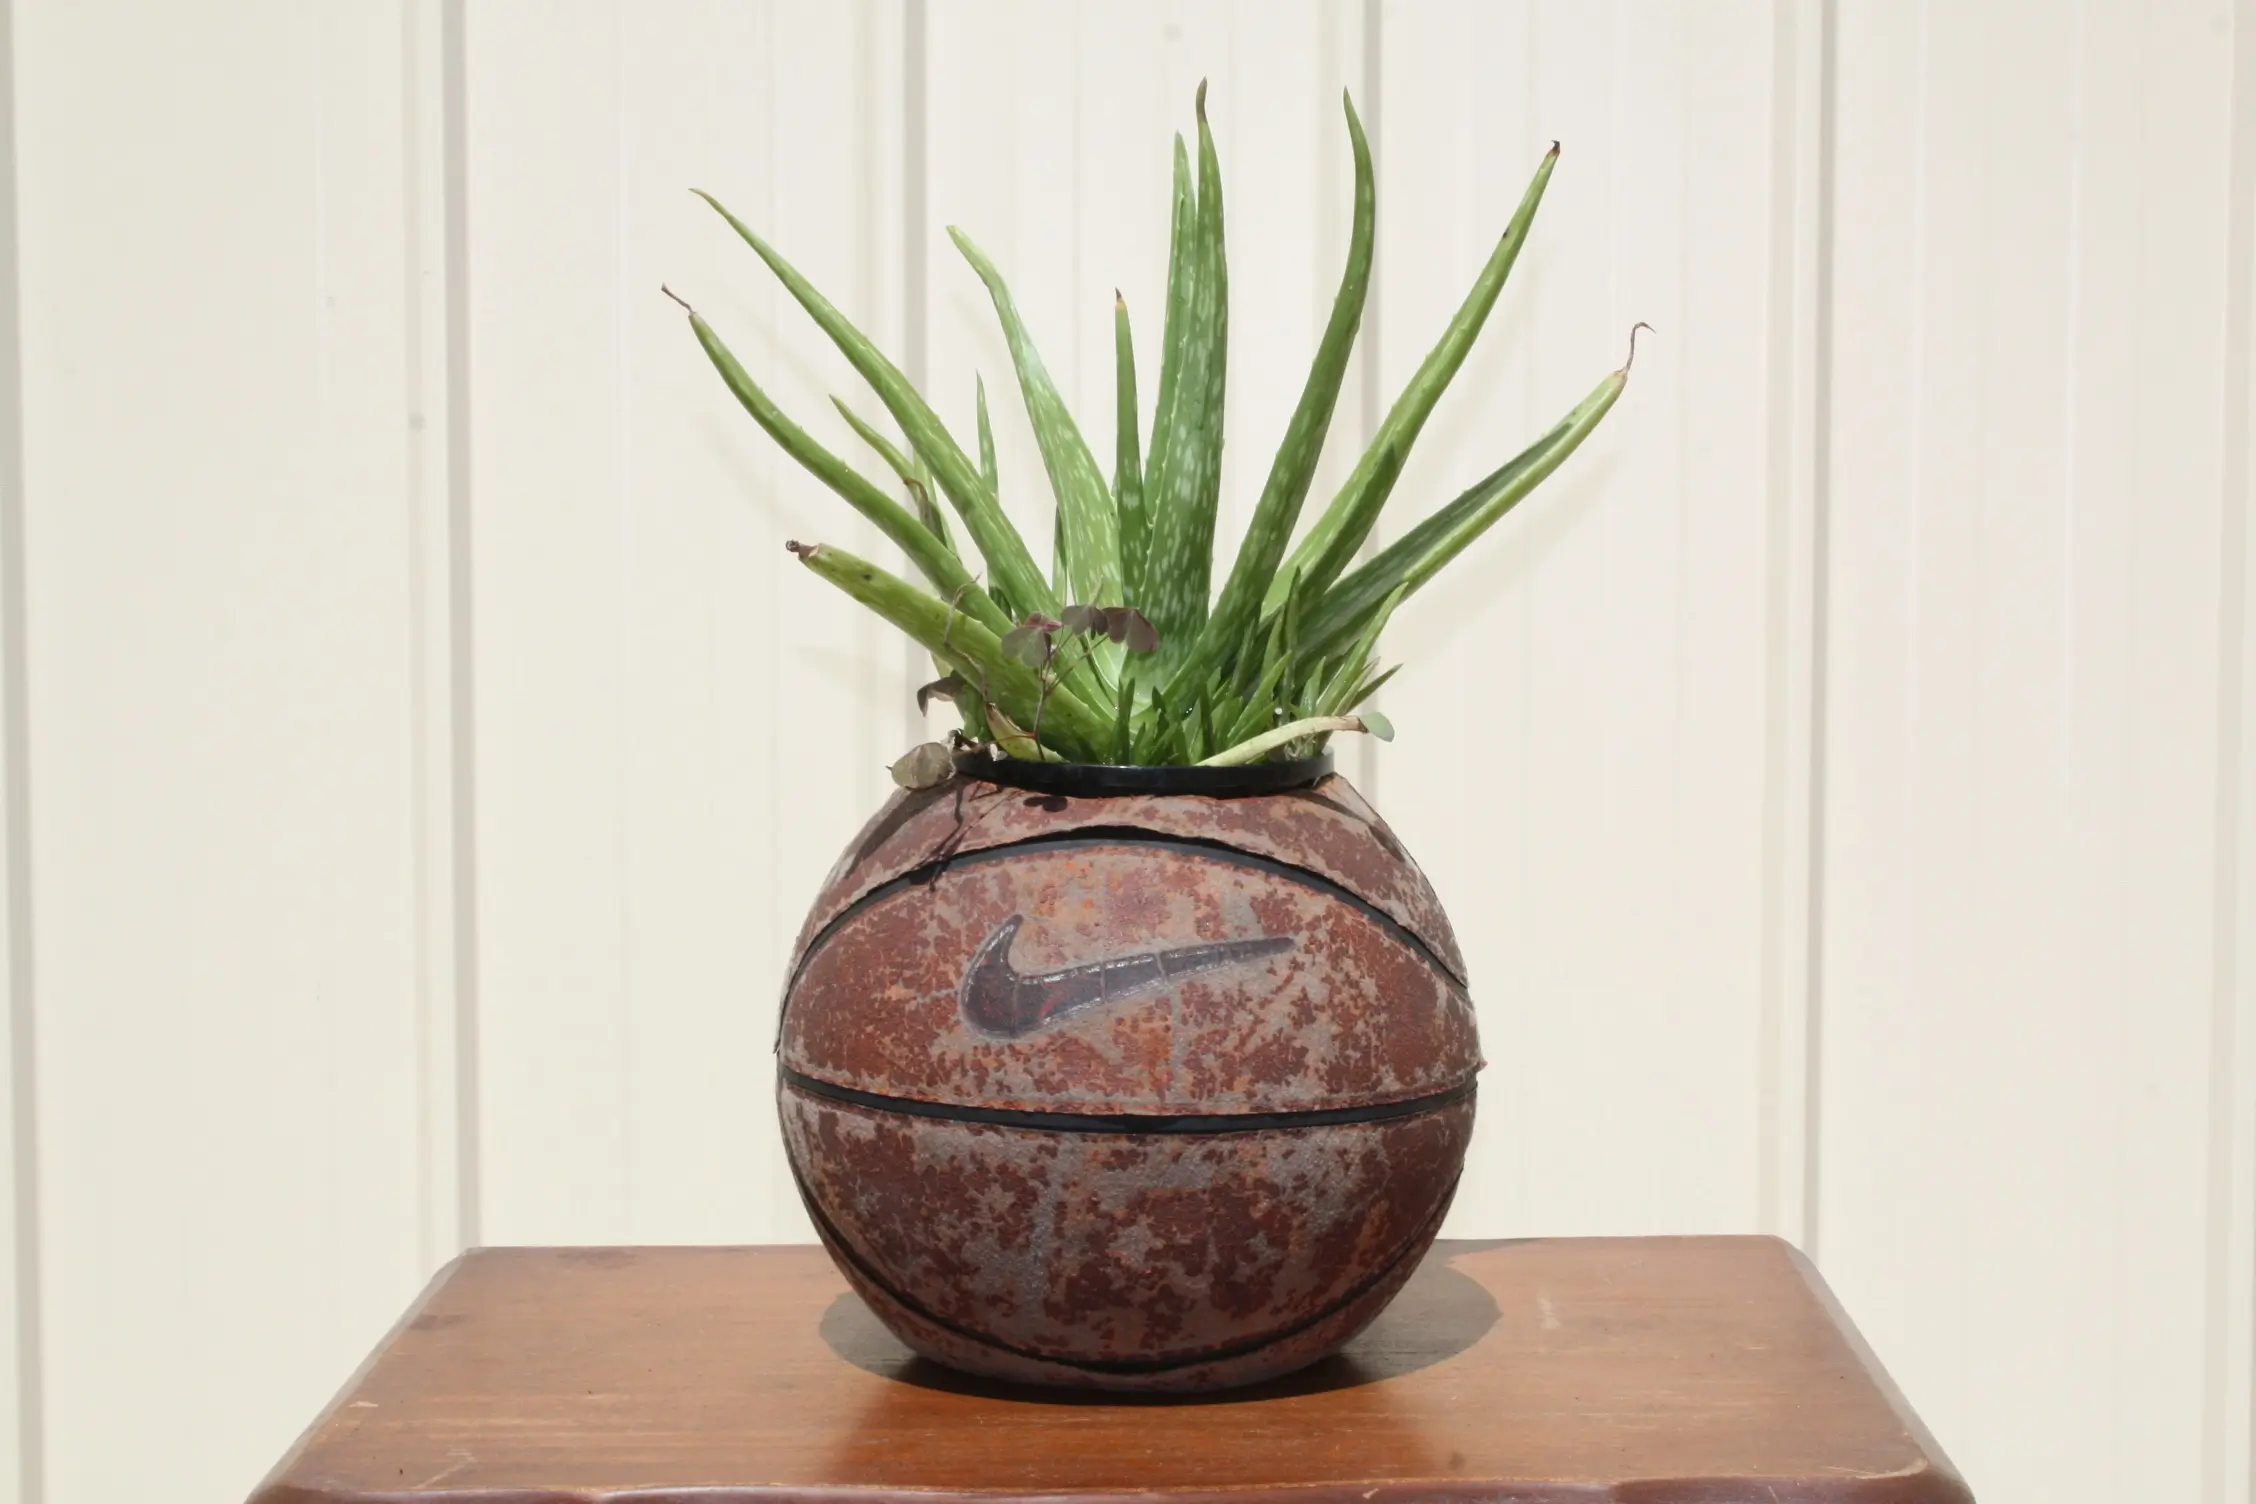 Old Nike ball recycled into sustainable planter